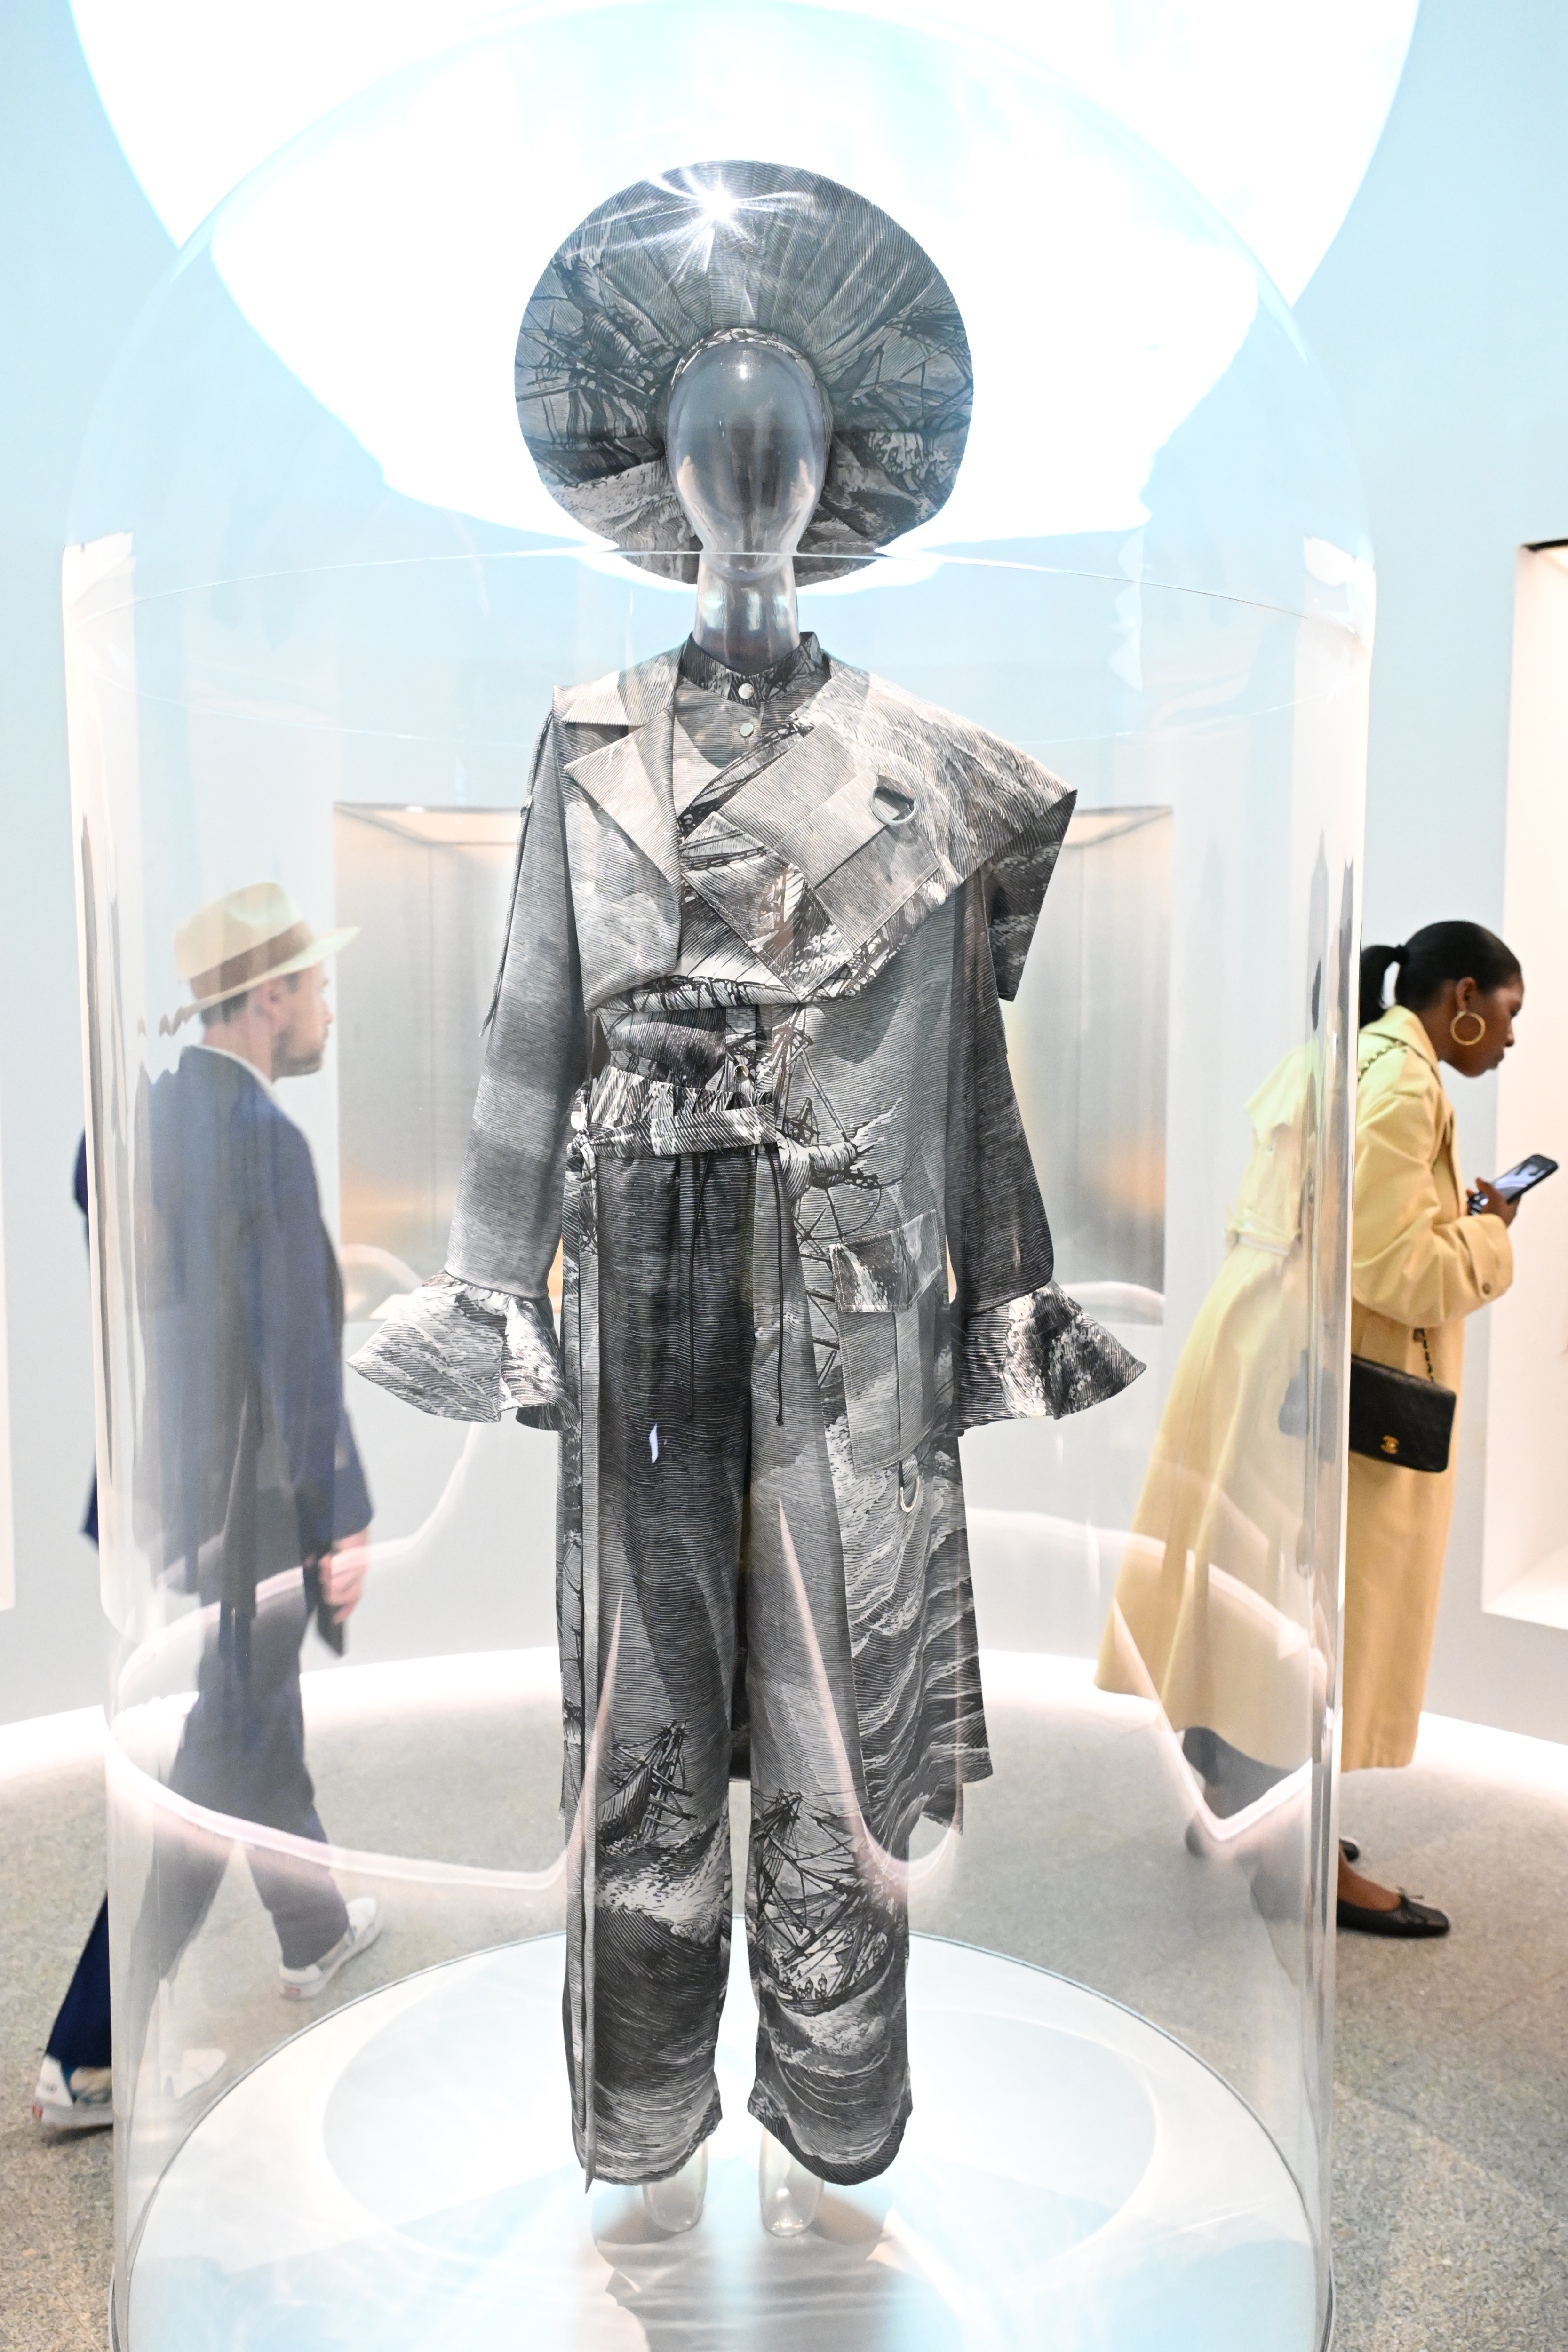 Mannequin displaying a patterned suit with a hat, exhibited in a glass case, with people observing in the background